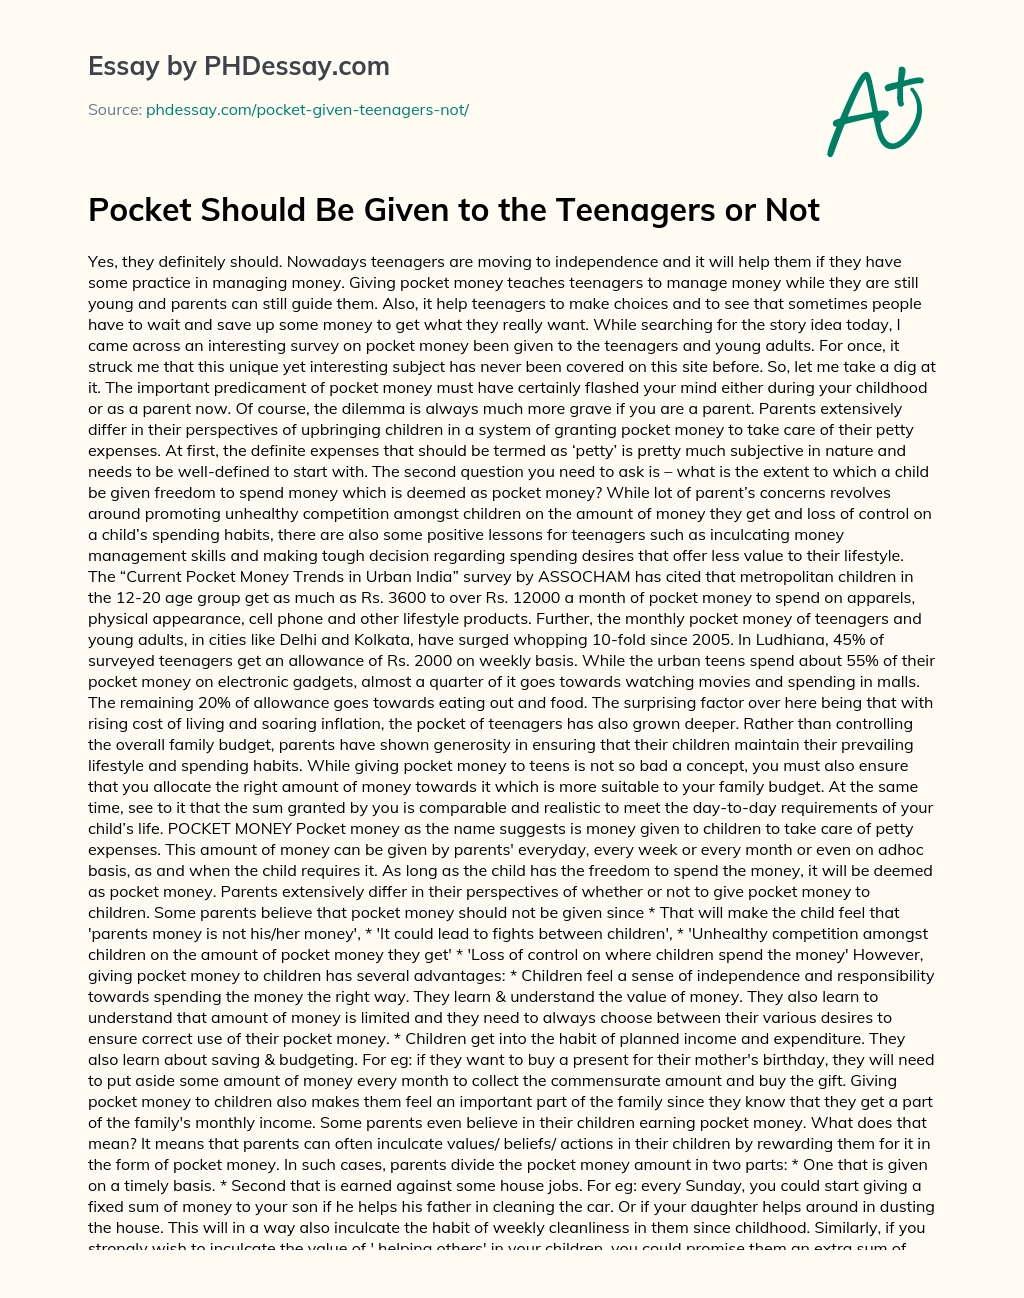 Pocket Should Be Given to the Teenagers or Not essay